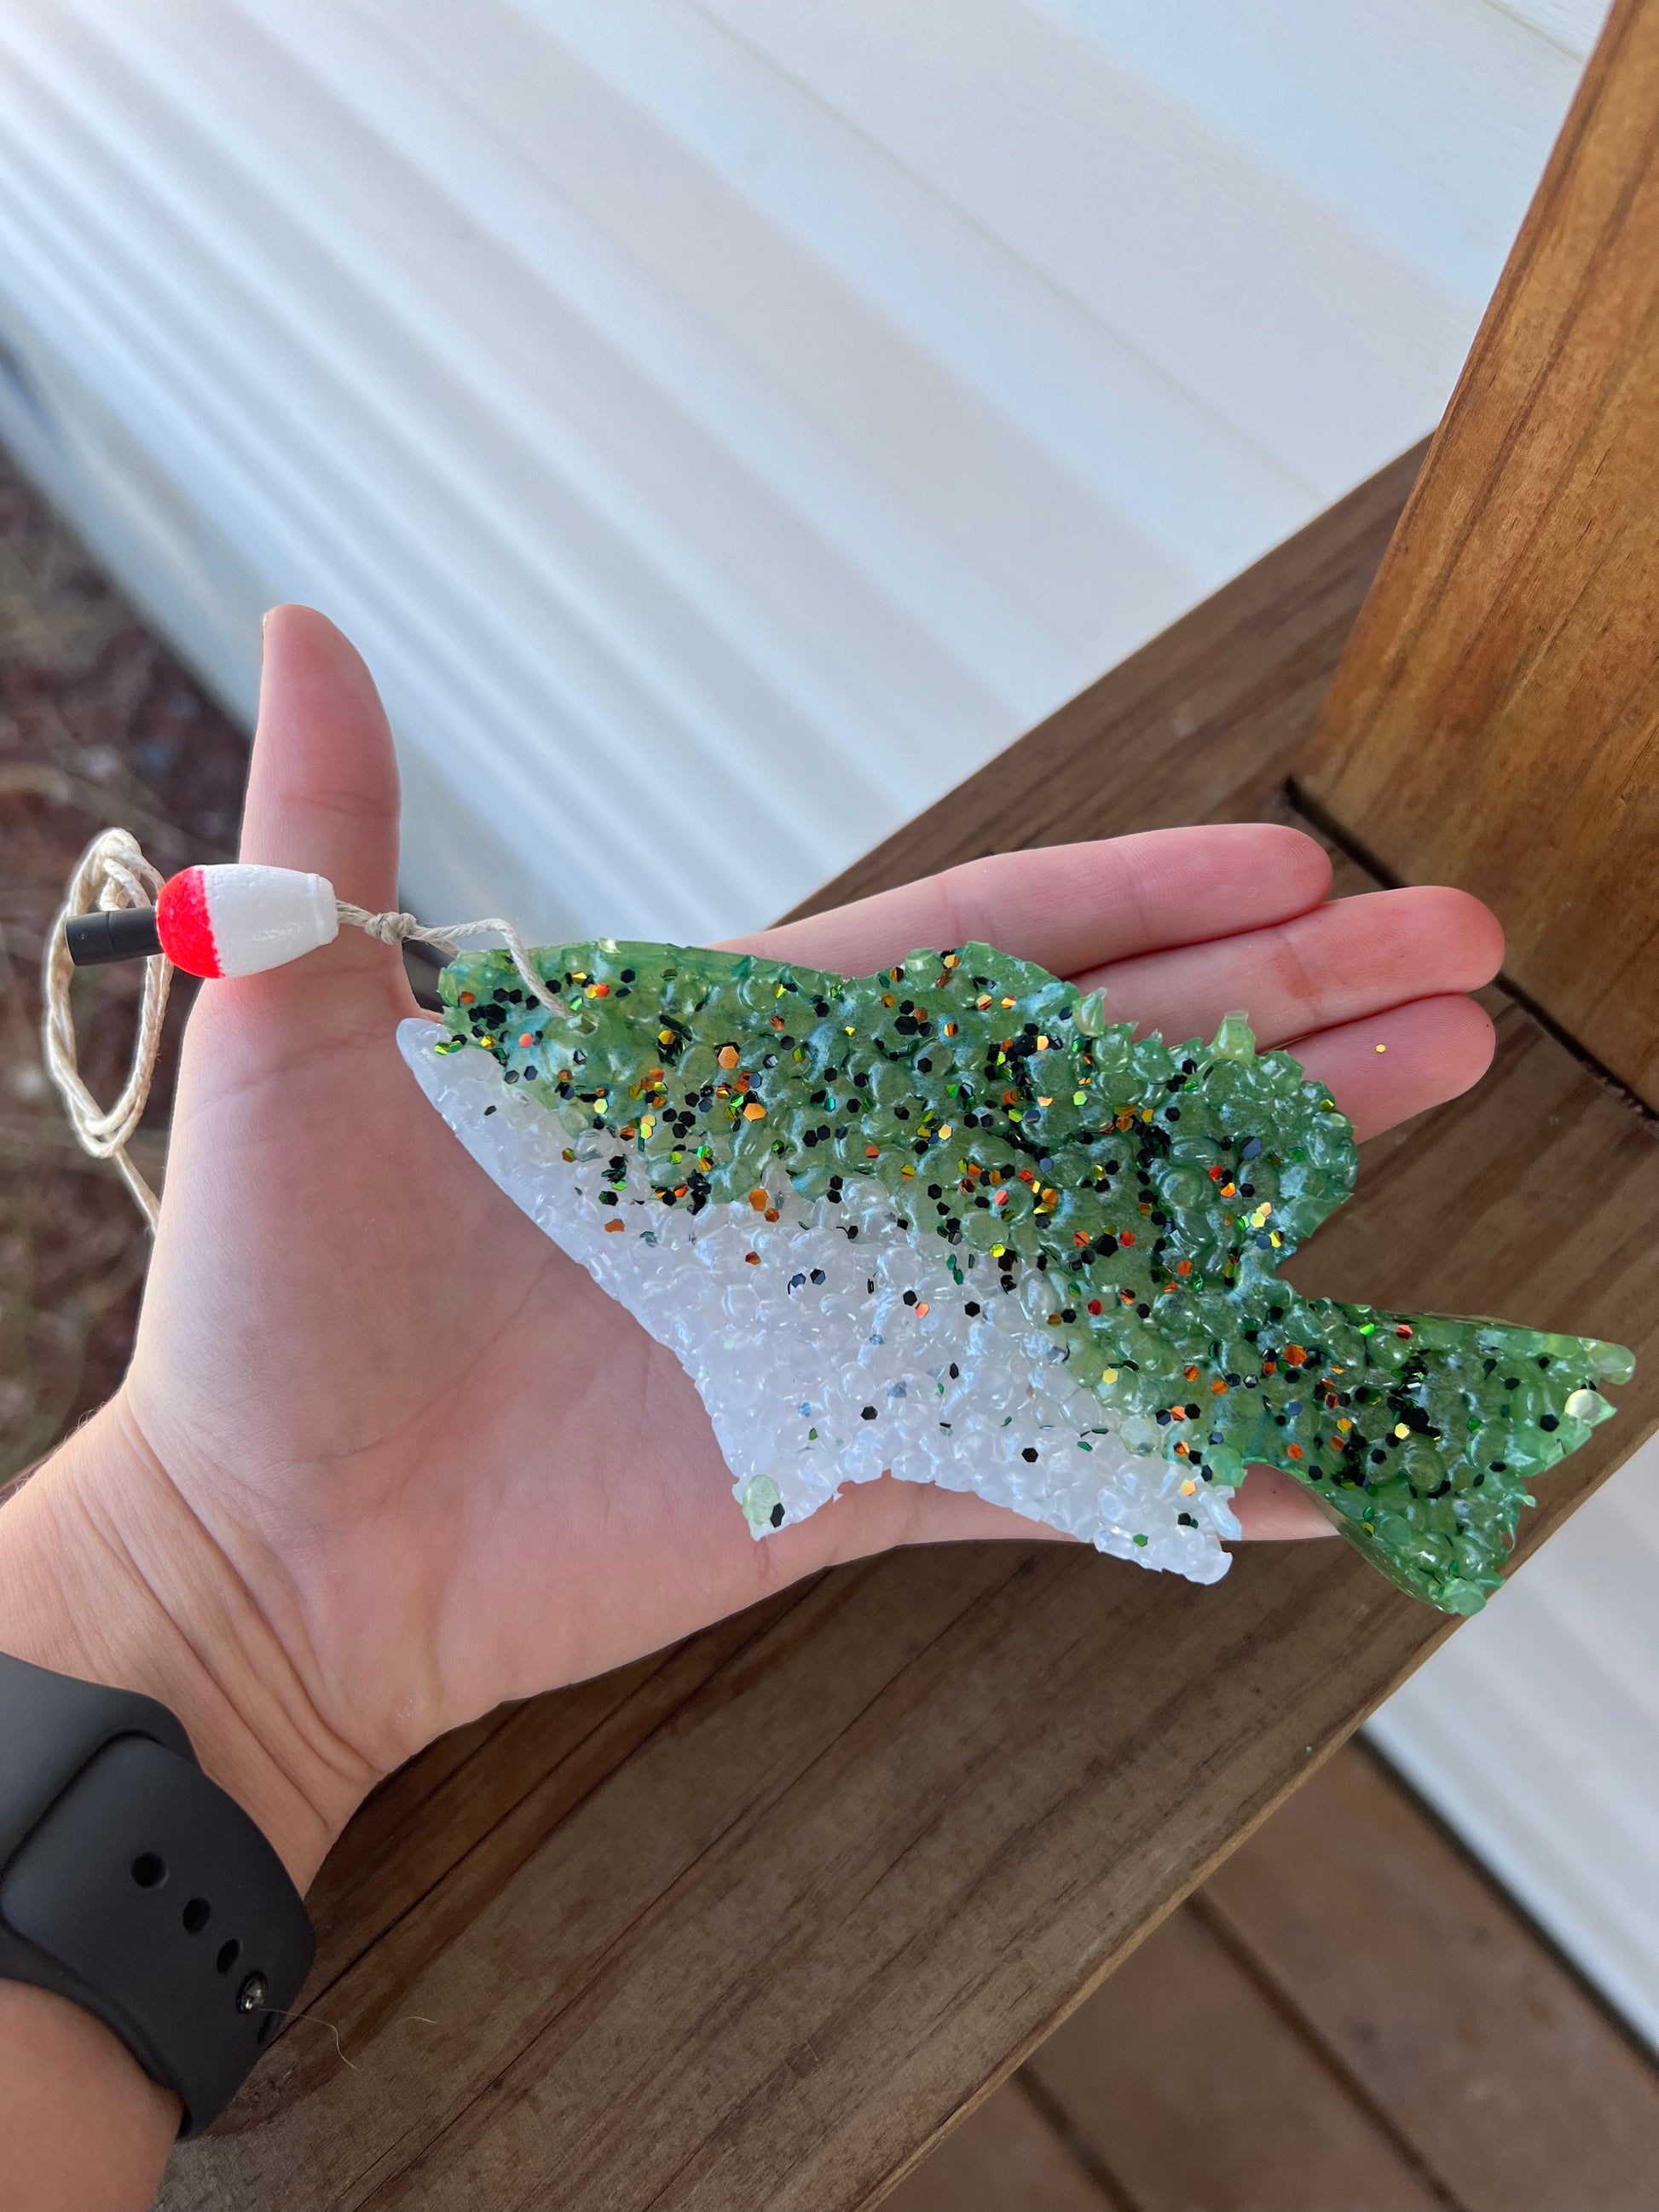 Bass Fish Car Freshie – The Crooked Cactus Boutique